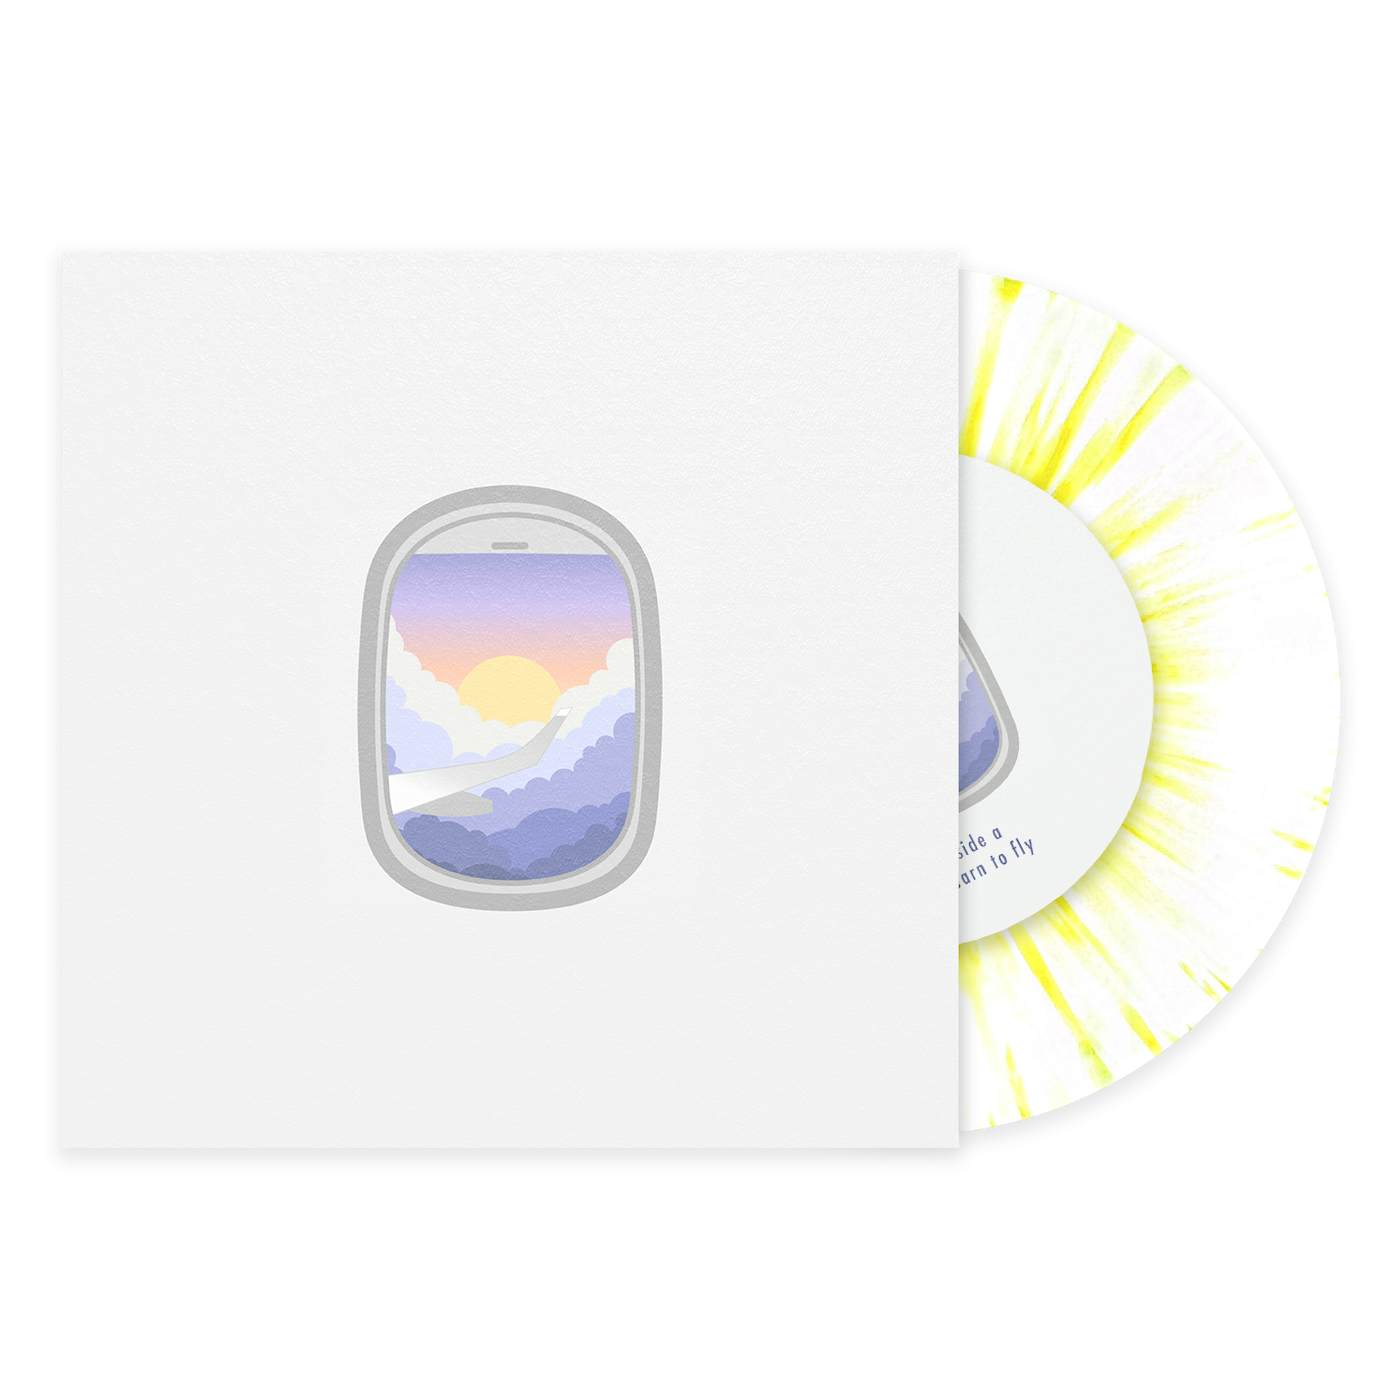 Surfaces Learn To Fly 7" Vinyl - White & Yellow Splatter